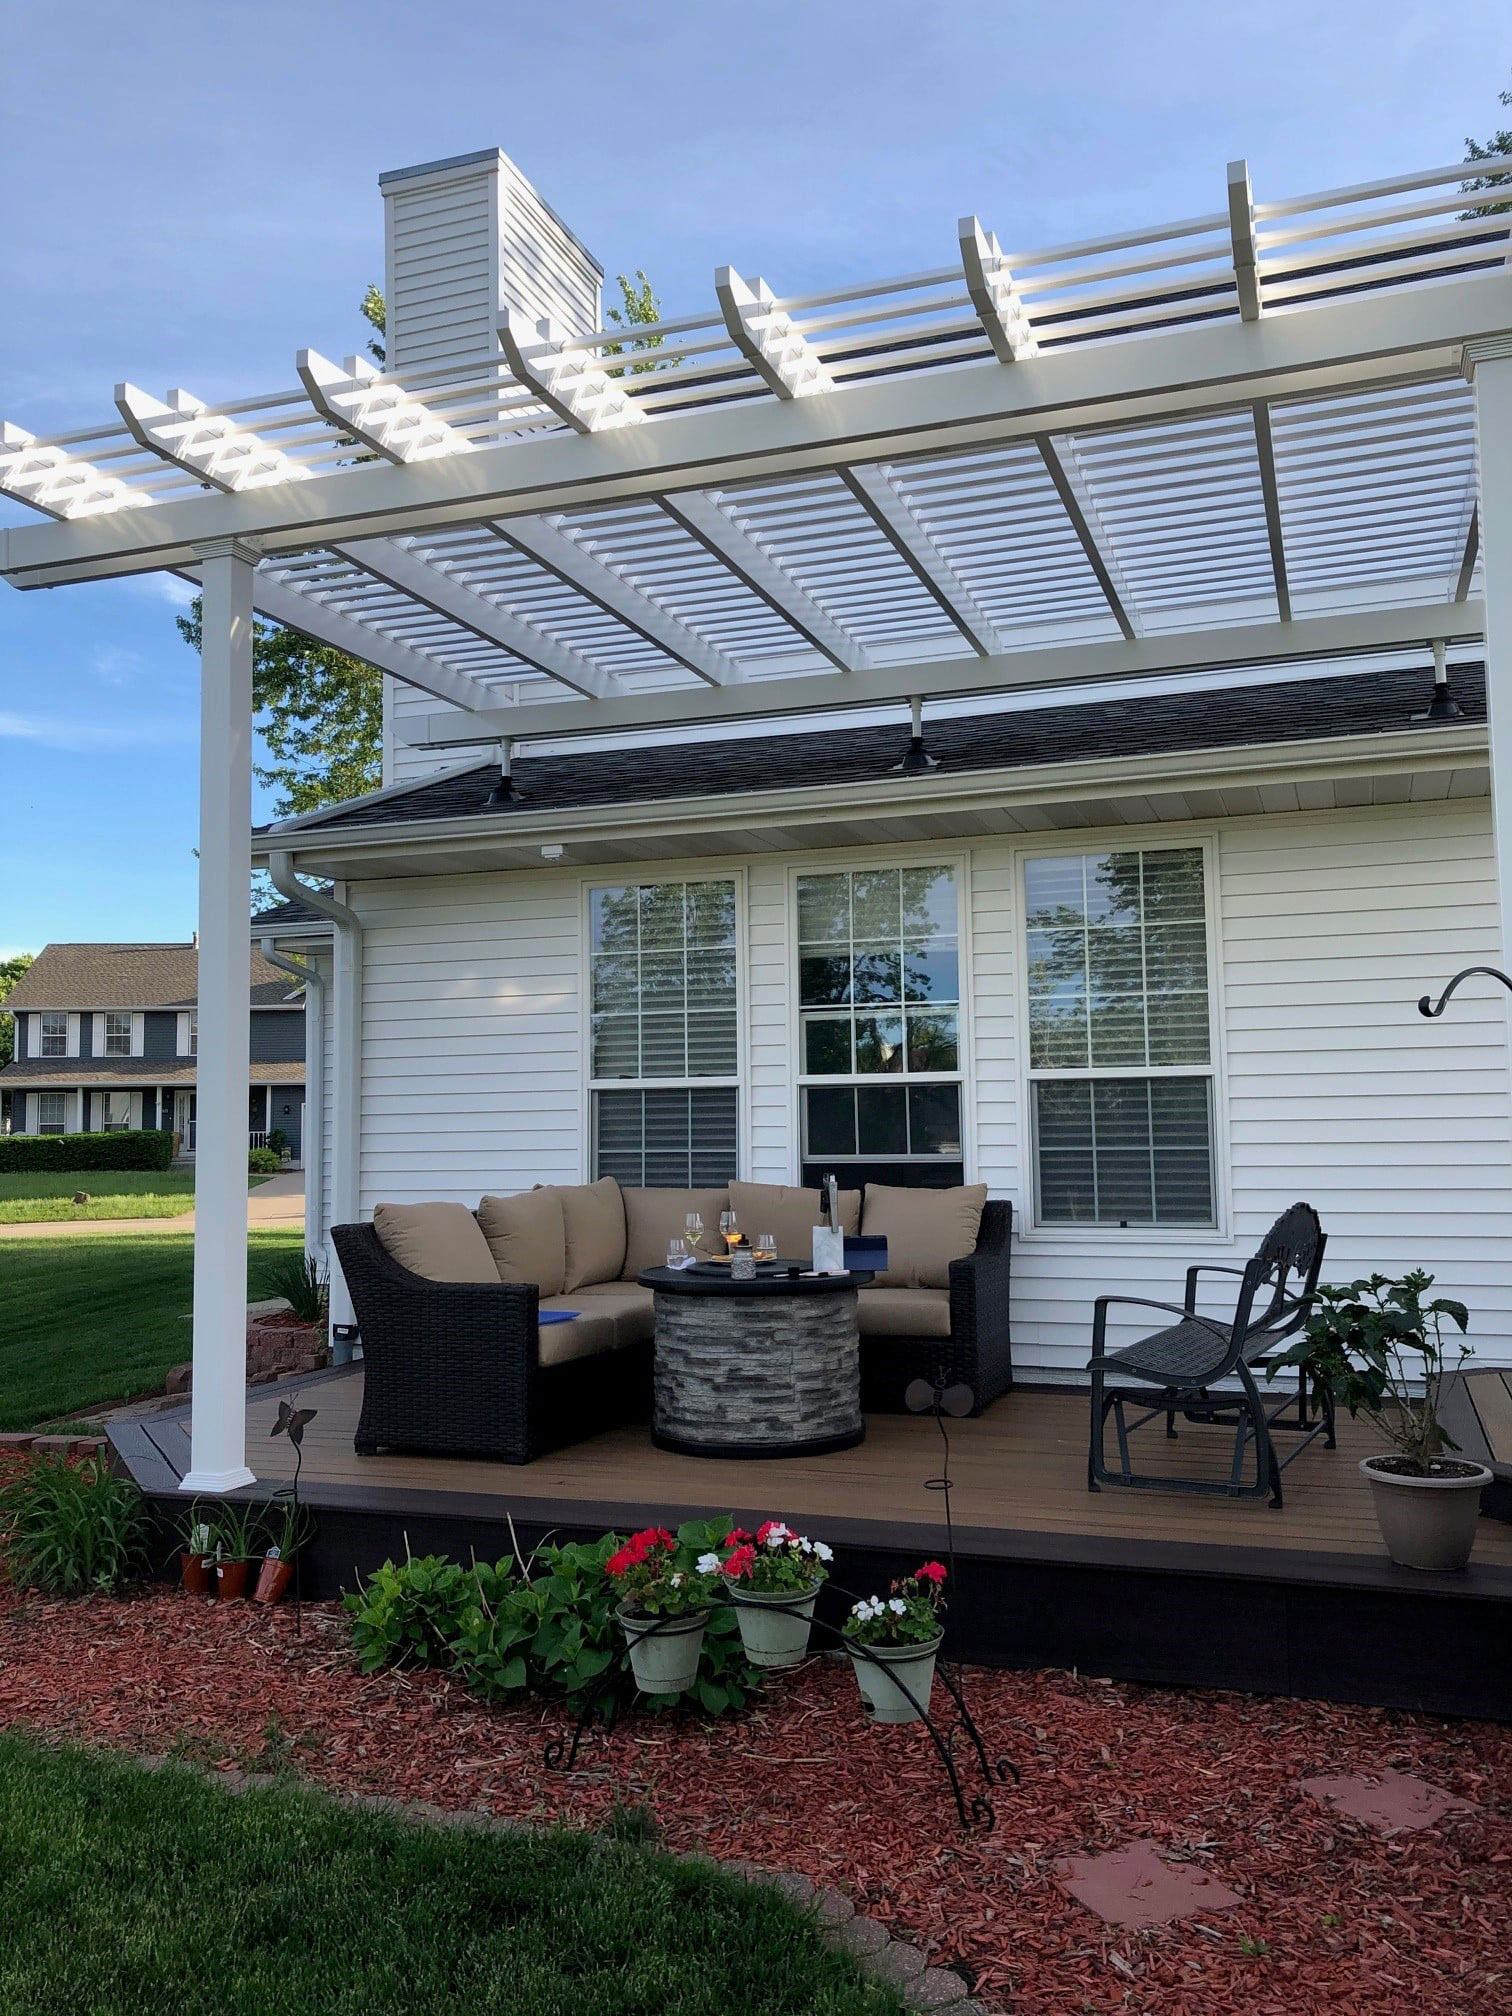 White pergola on patio with roof riser attachment to the home